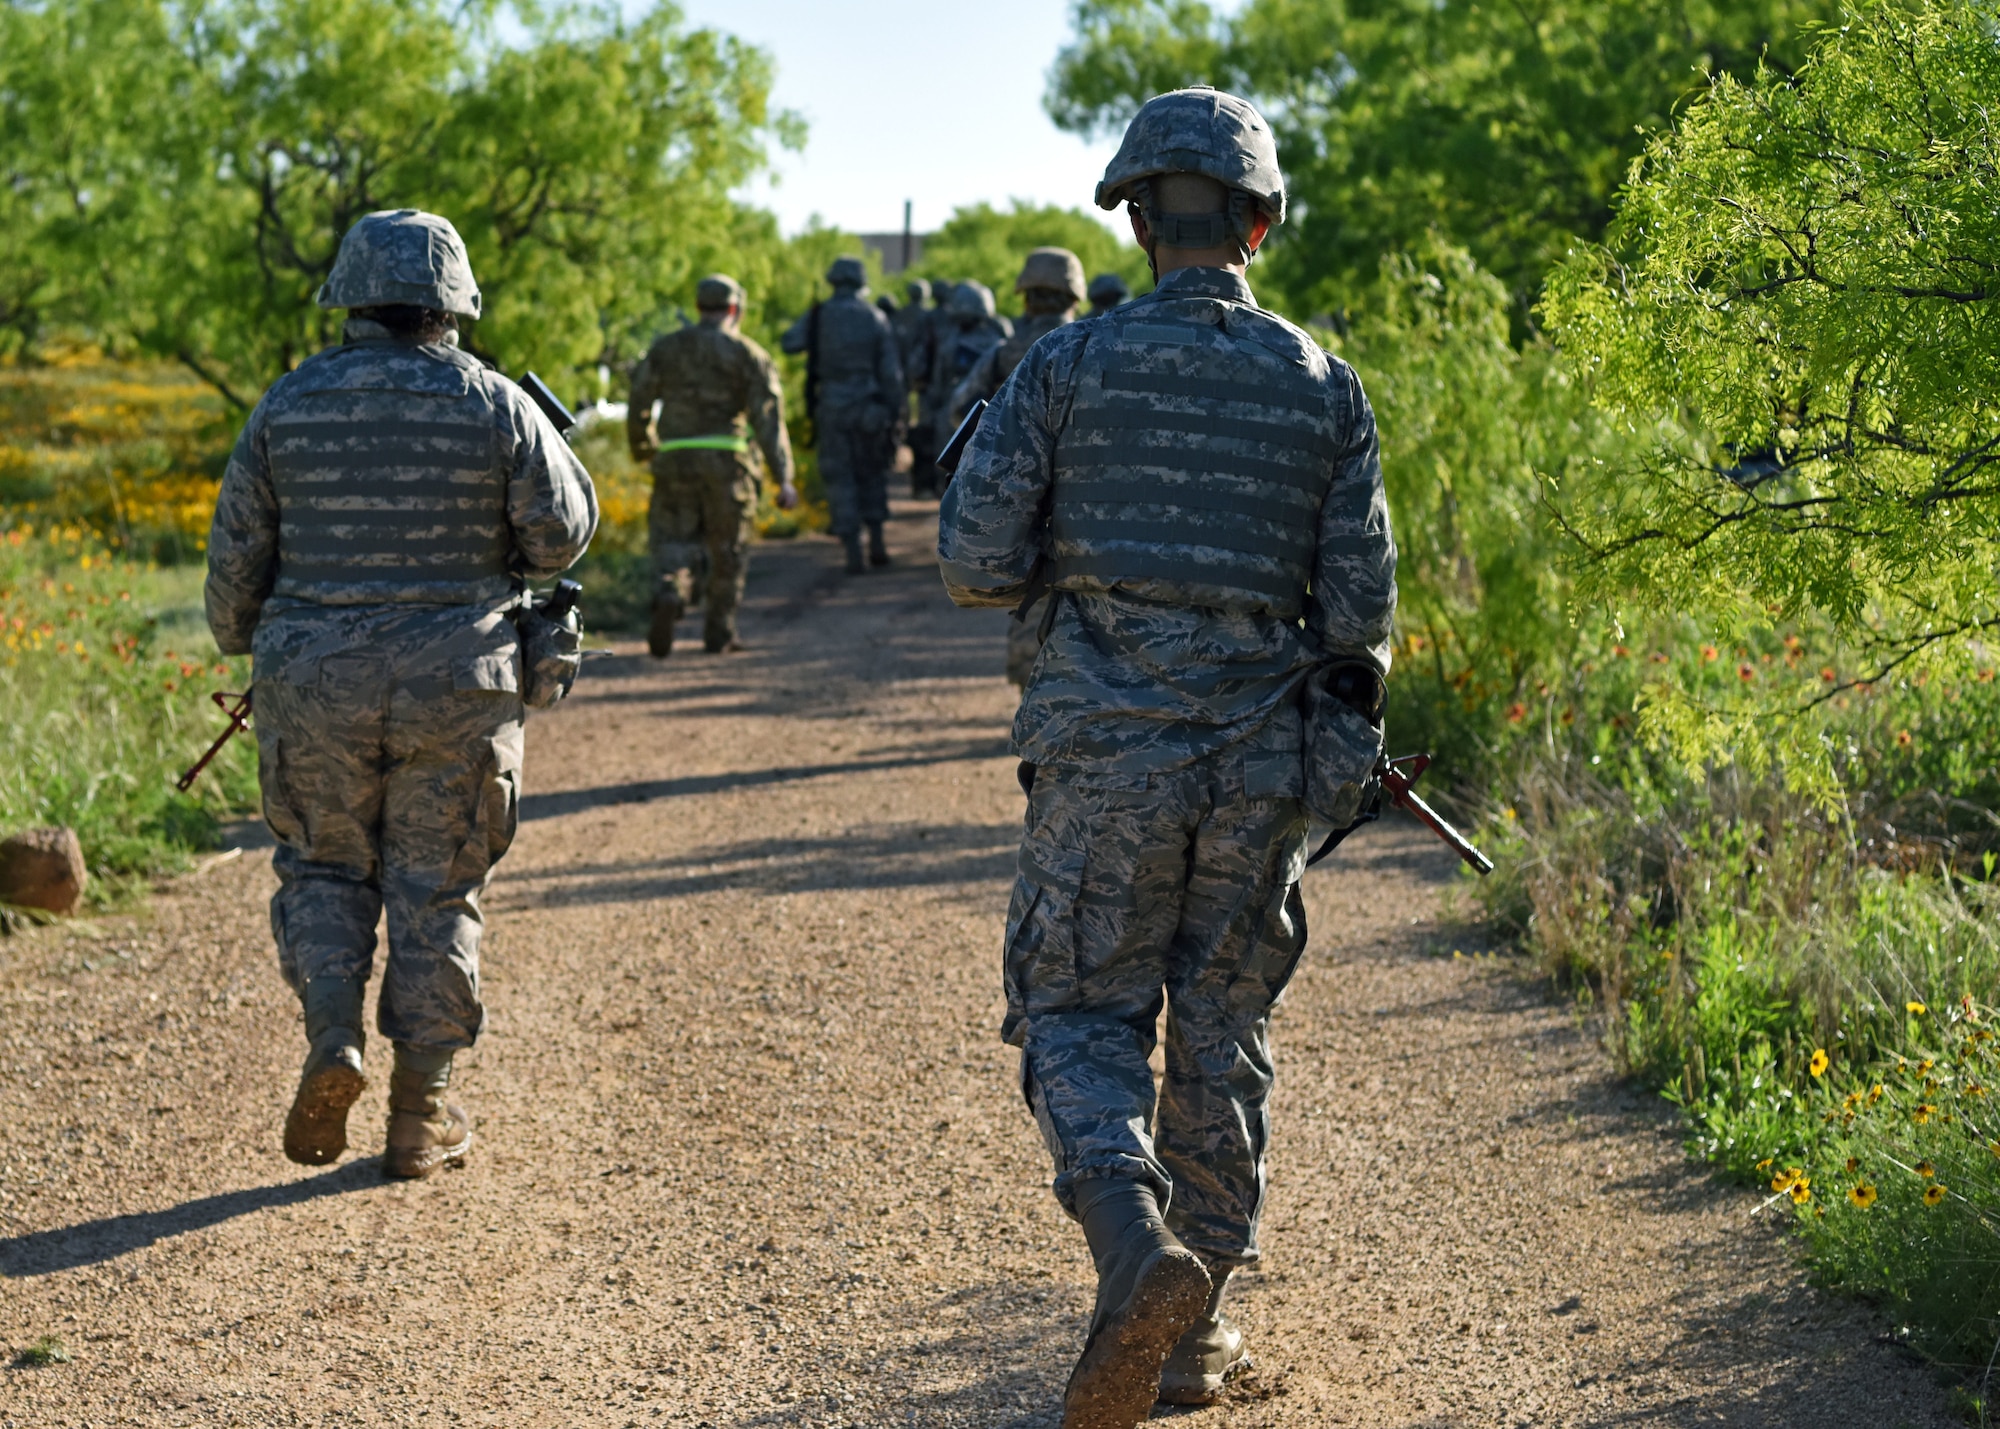 Angelo State University Air Force ROTC Cadets march in a tactical formation back to their forward operating base Camp Sentinel during their field training exercise at Goodfellow Air Force Base, Texas, April 25, 2019. ROTC students moved in fire teams and completed simulated missions including attacks and reconnaissance. (U.S. Air Force photo by Airman 1st Class Ethan Sherwood/Released)